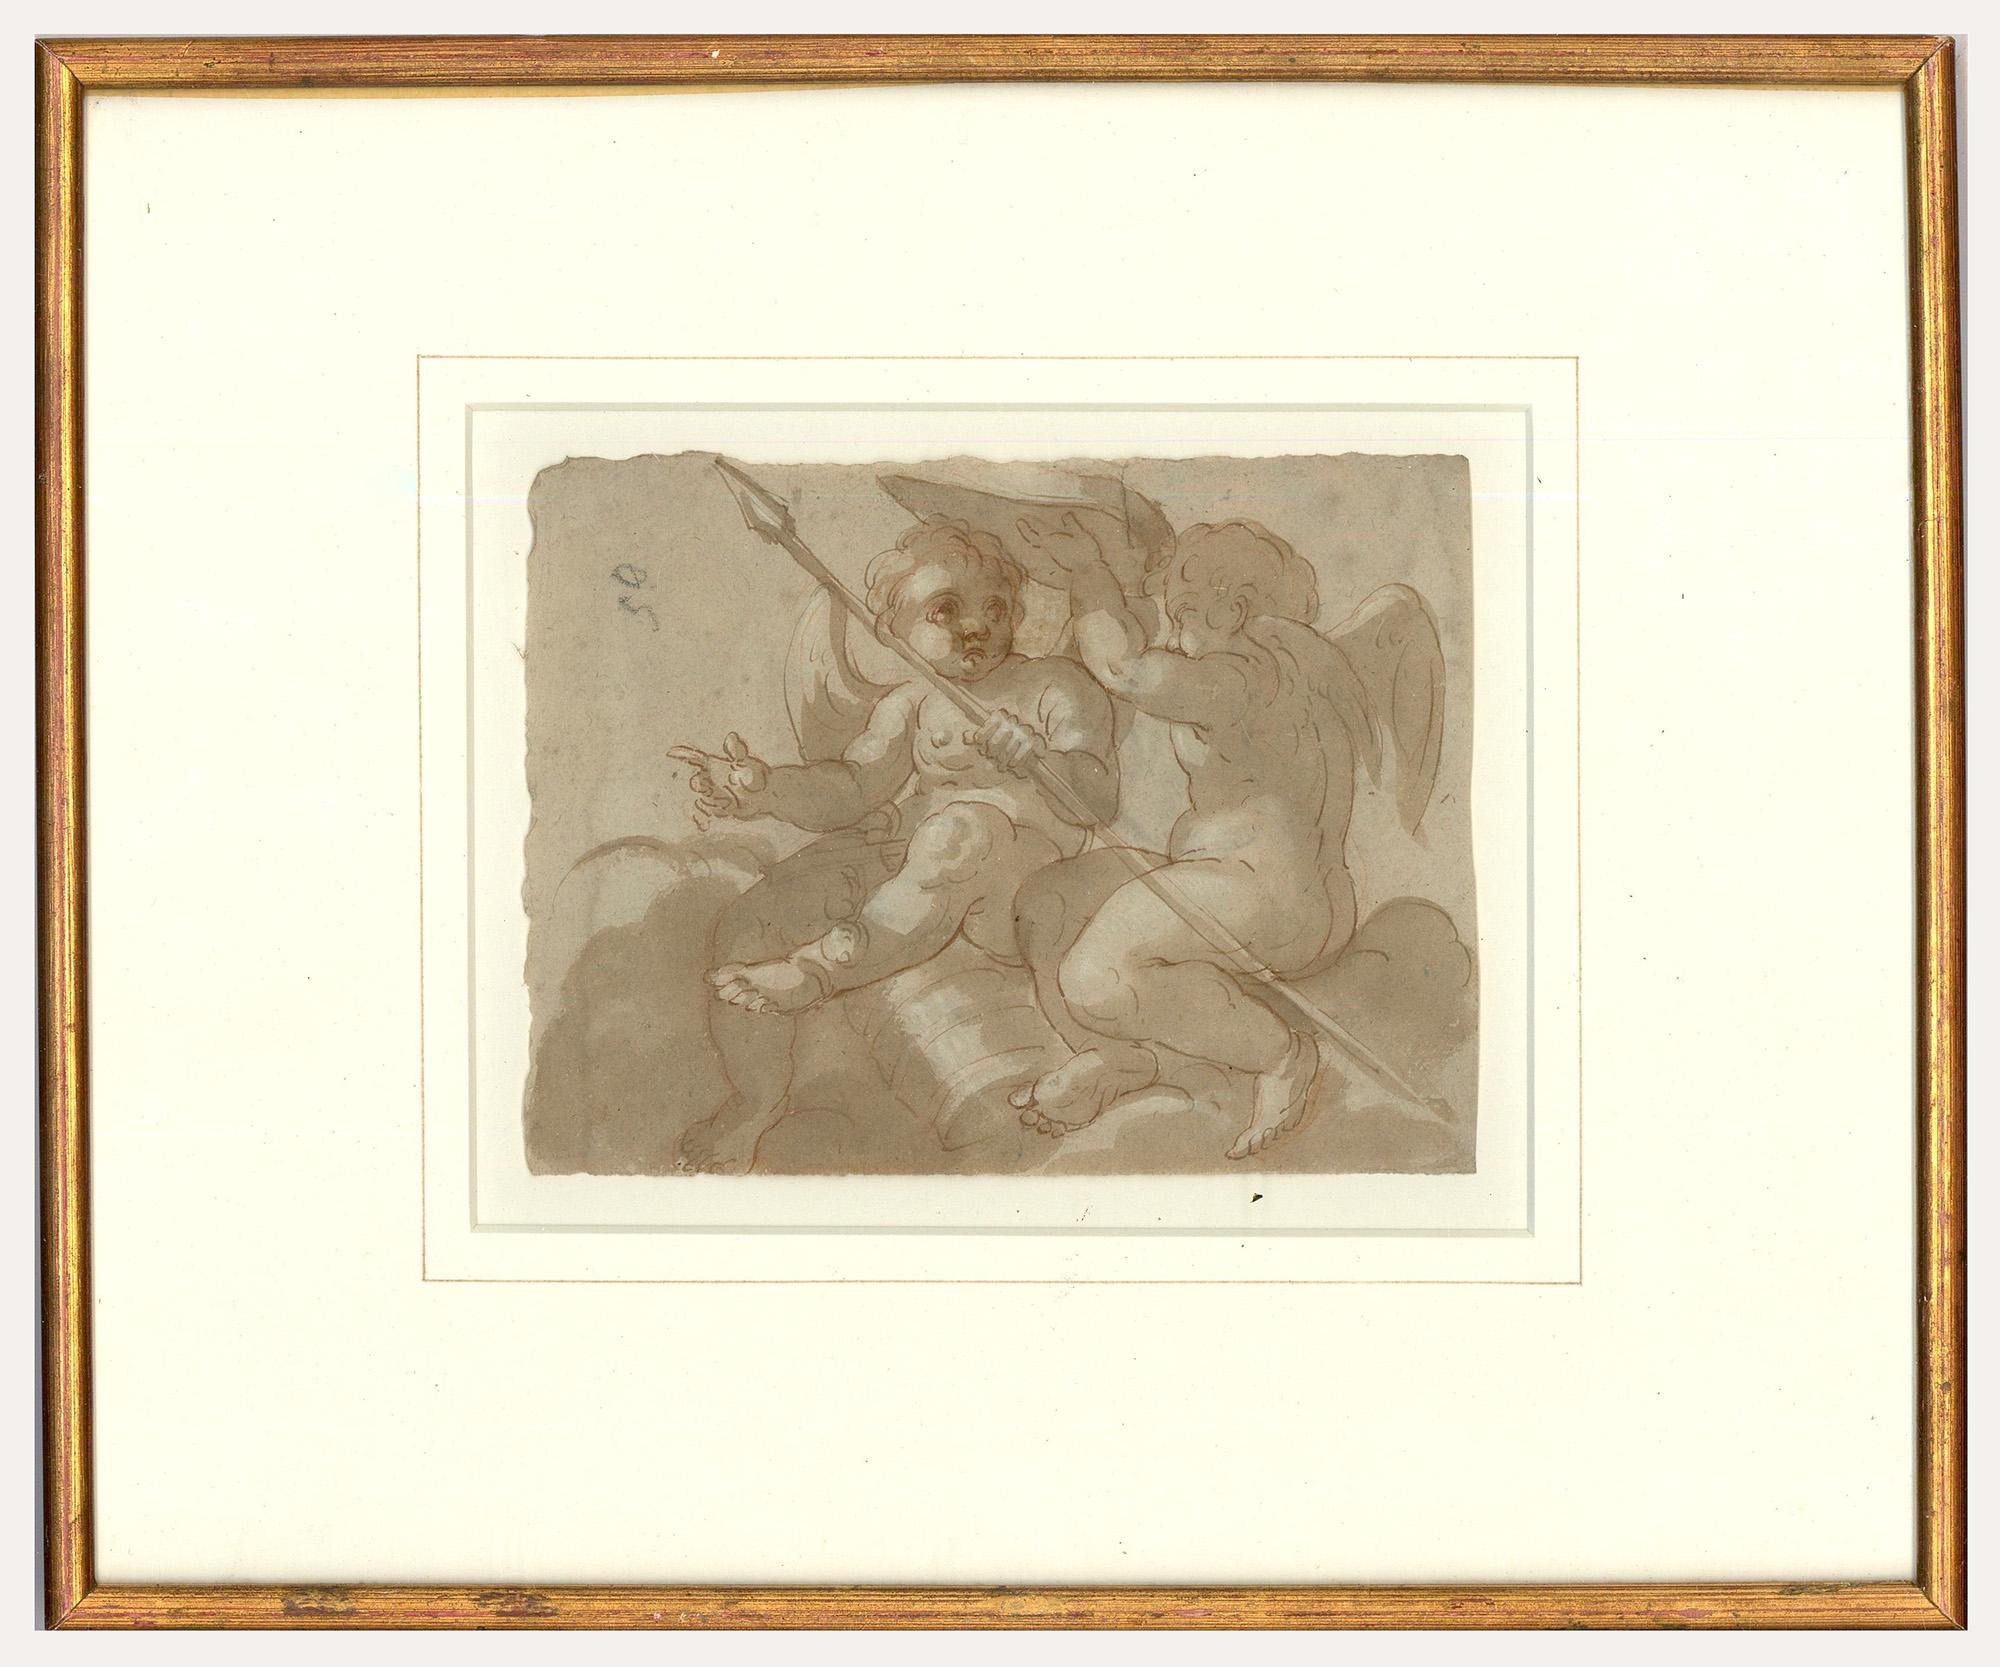 This fine renaissance study, attributed to Bolognese painter Prospero Fontana (1512-1597), depicts two cherubs seated in clouds, playing with the arms of Mars. Elegantly mastered in brown ink with washes of watercolour and 'lumi di biacca'. The